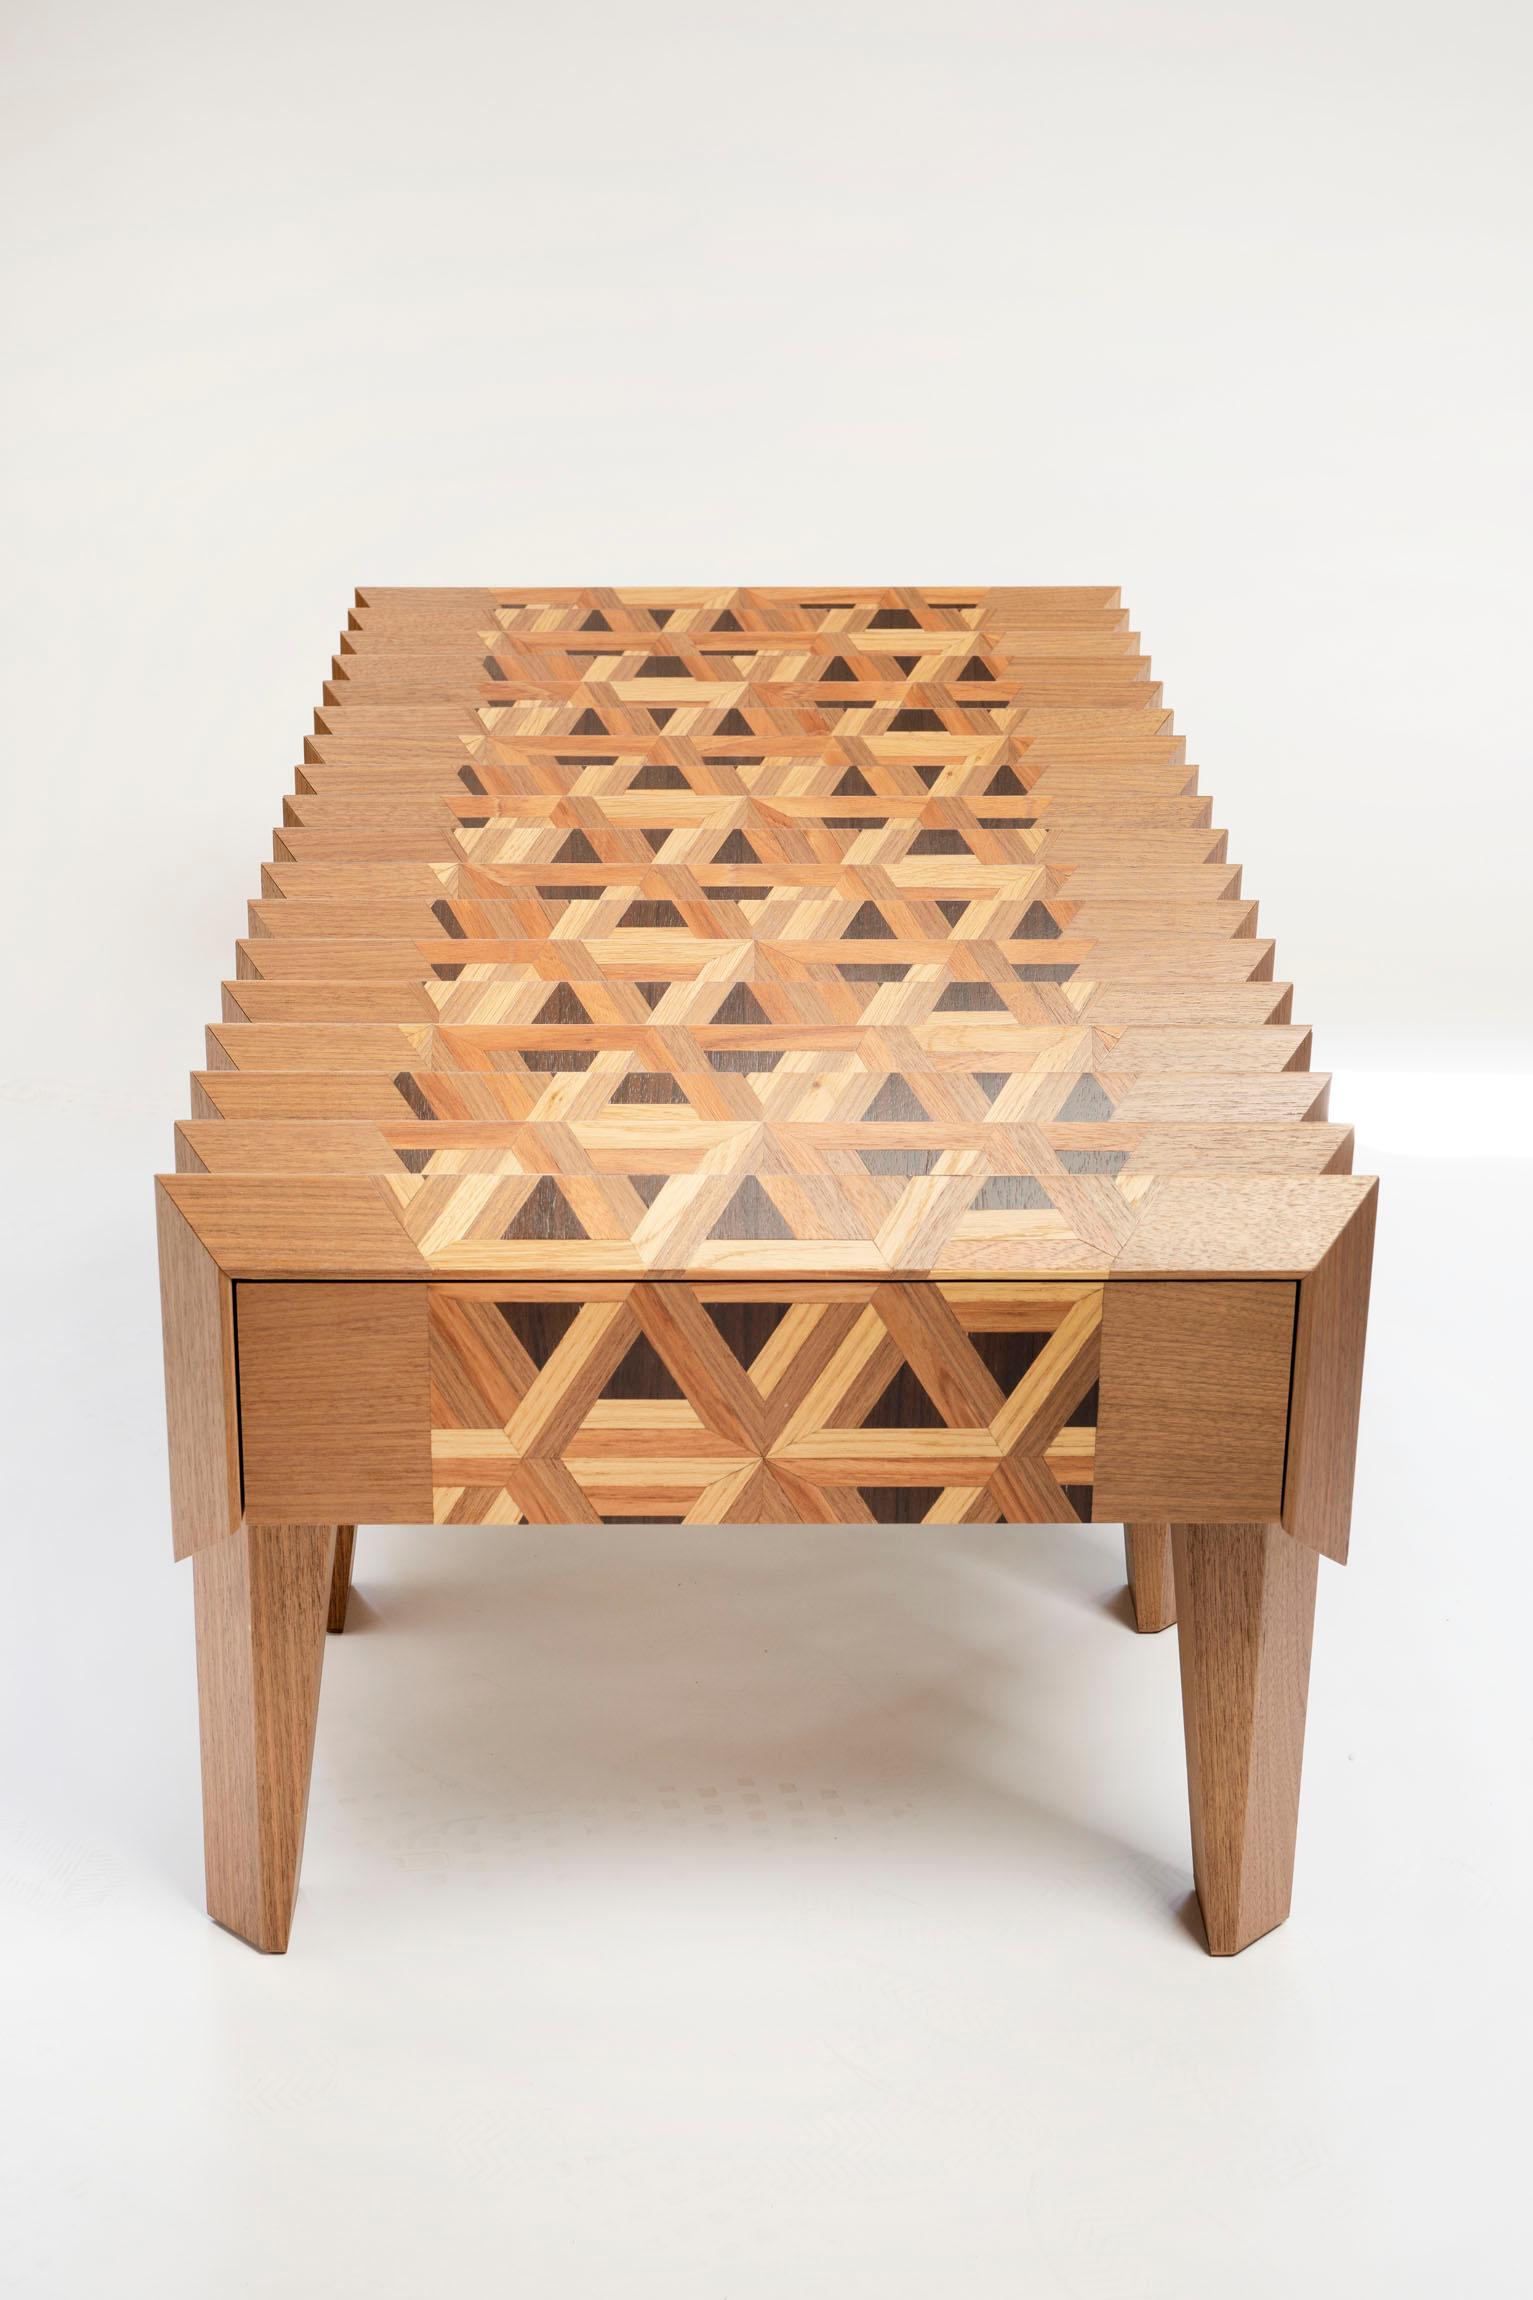 The Tavolo in Metamorfosi is a coffee table which consists of a top of triangles with a specially processed glass plate on top. If you look over the table on the short sides, you will see a 3D cube pattern and another pattern from the other side.